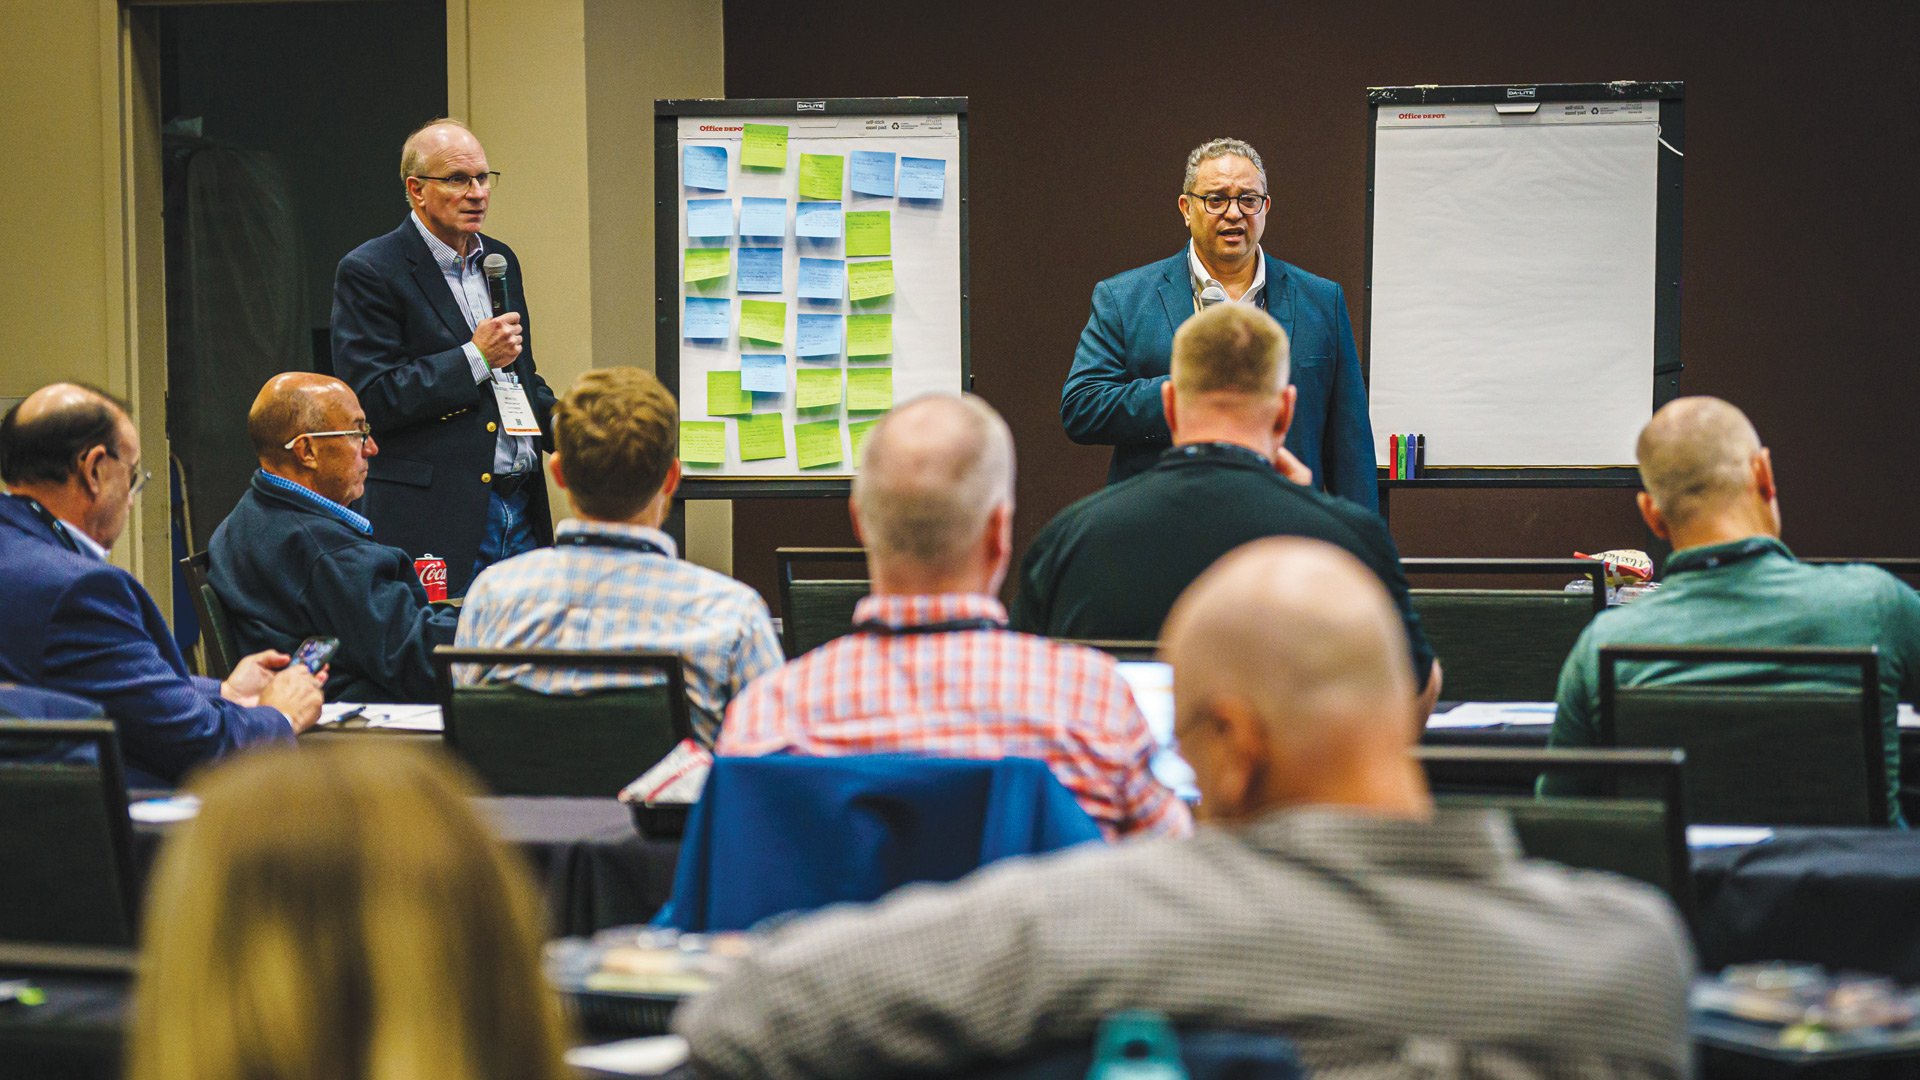 Jim Wetzel (left) and Conrad Leiva (right) leading an educational workshop at SOUTHTEC 2023, “Smart Manufacturing: Why It Matters and How to Achieve It,” sharing insights on securing the future success of manufacturing operations.